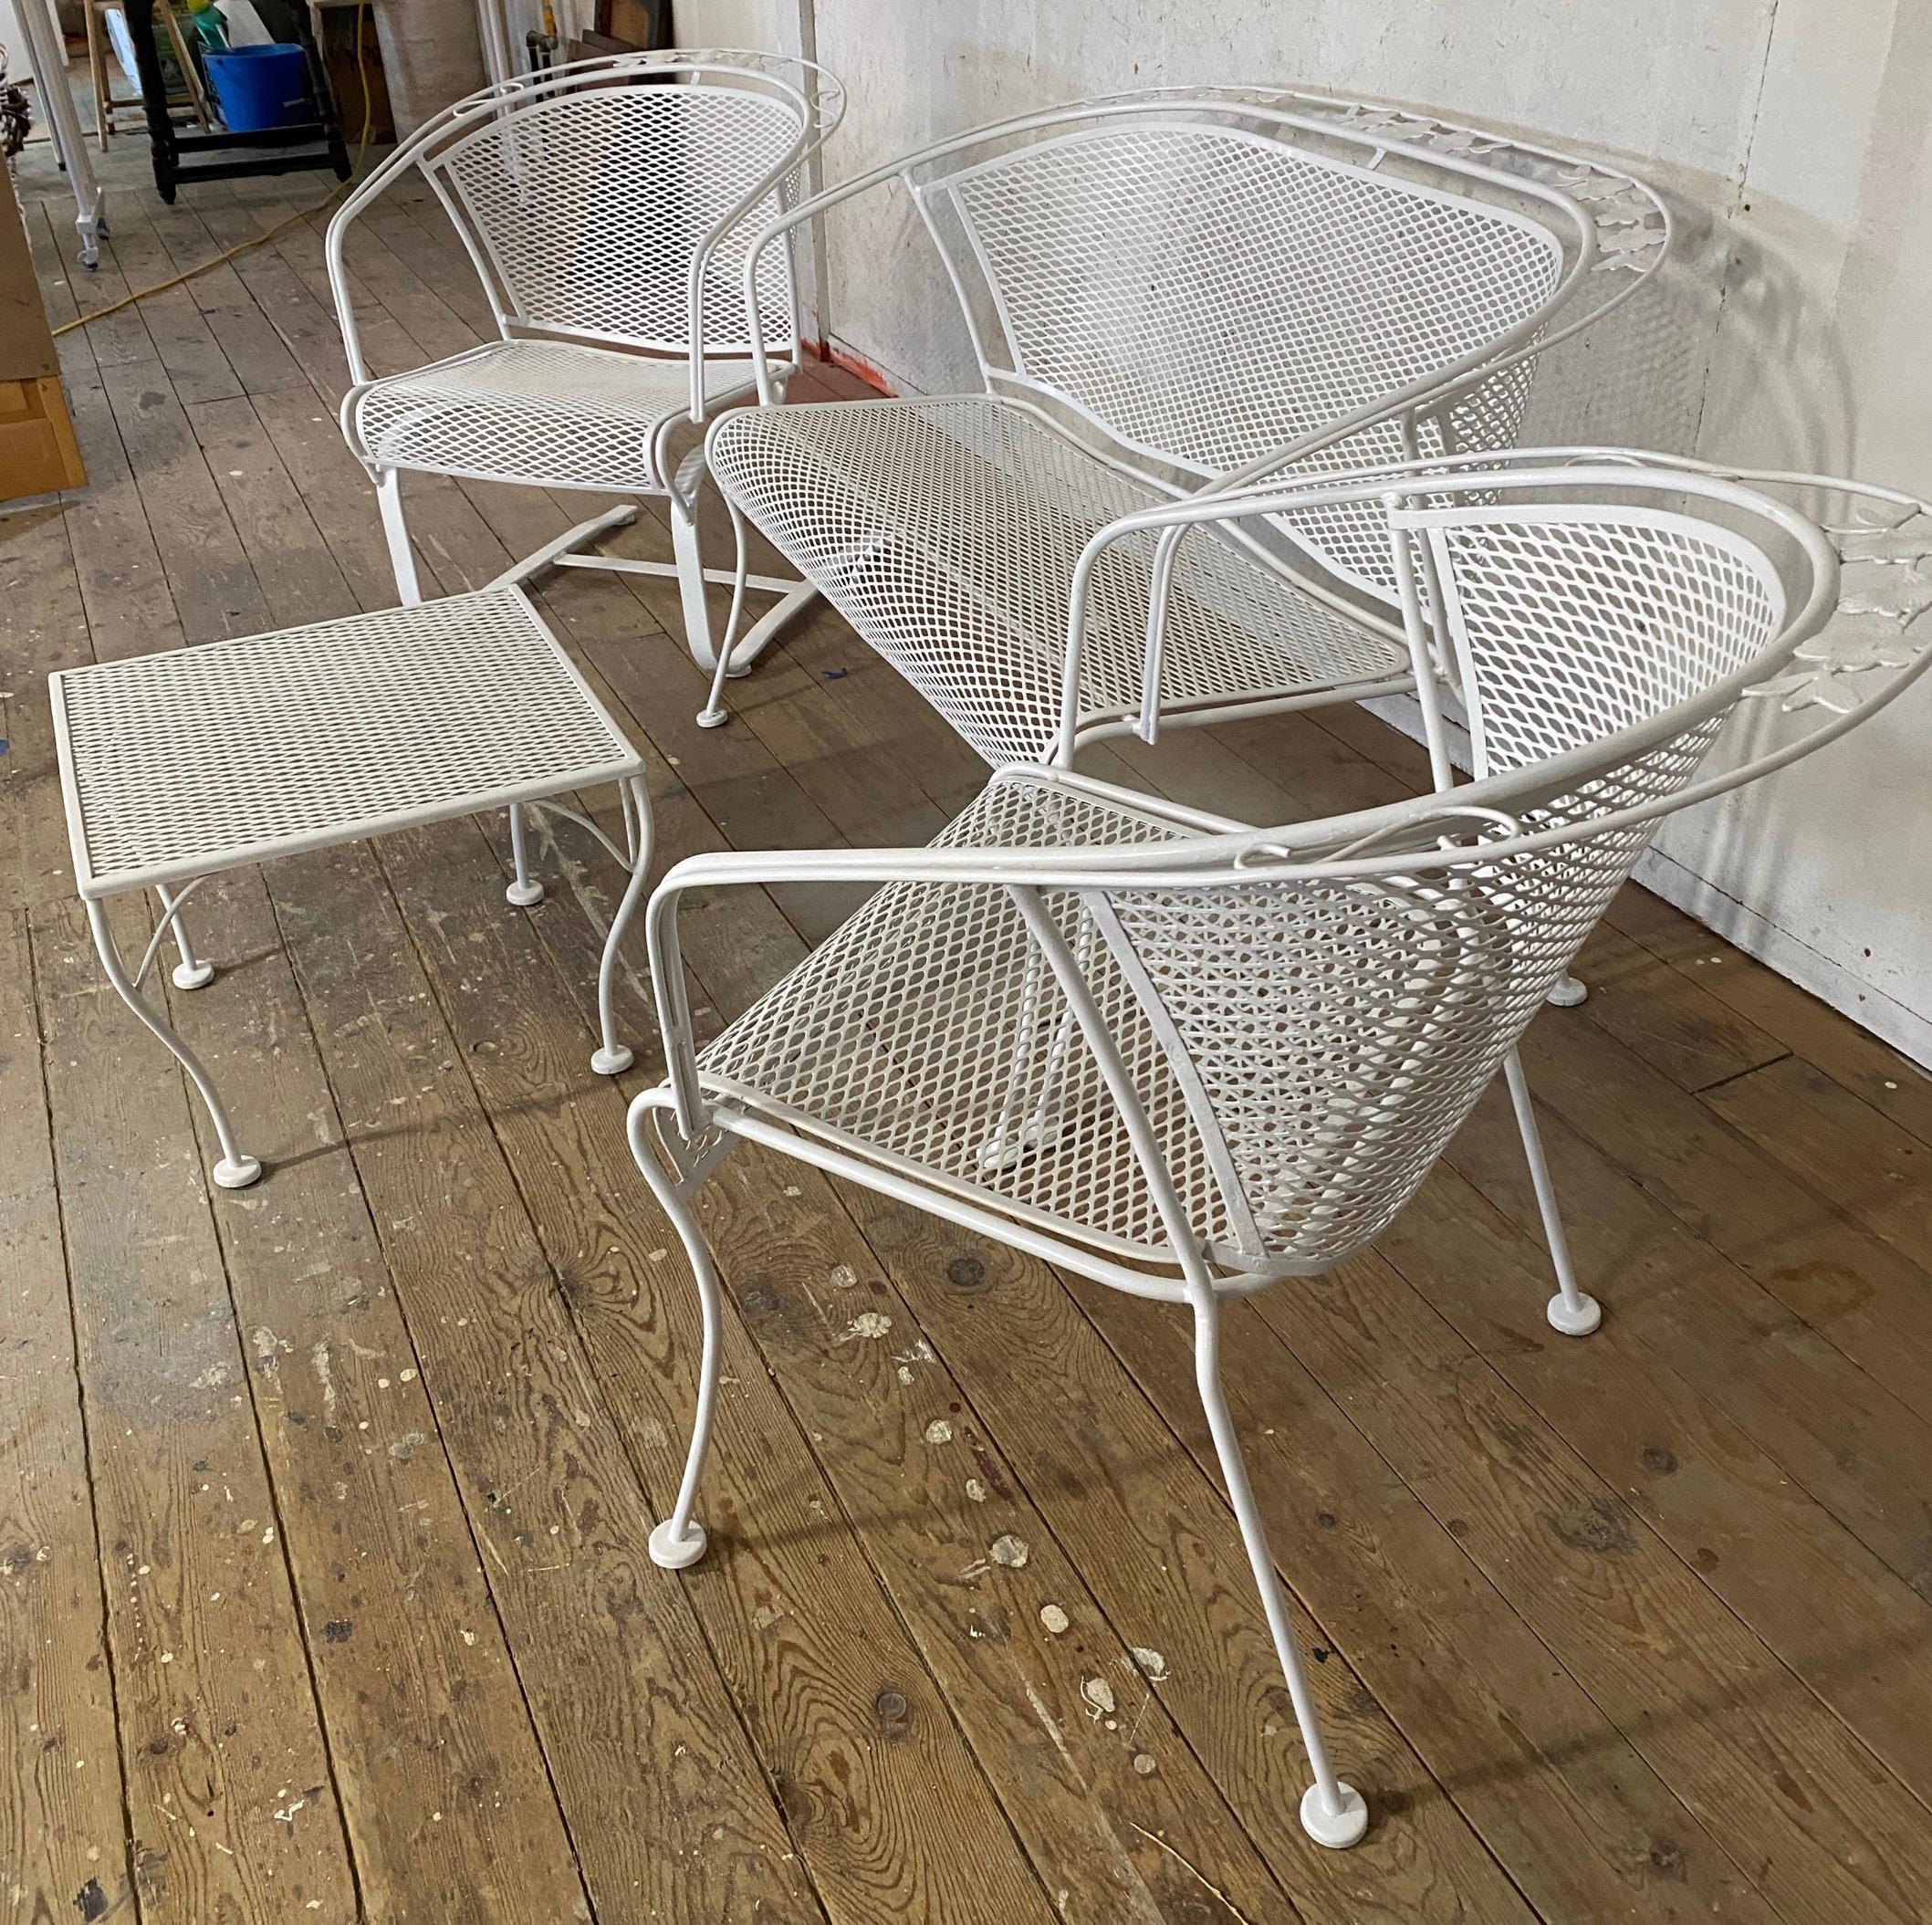 4 piece Salterini wrought iron and metal mesh garden seating ensemble consisting of a two seat sofa settee or loveseat, one cantilevered spring lounge chair, one arm chair topped off by a matching coffee table. All seating pieces have a barrel back.